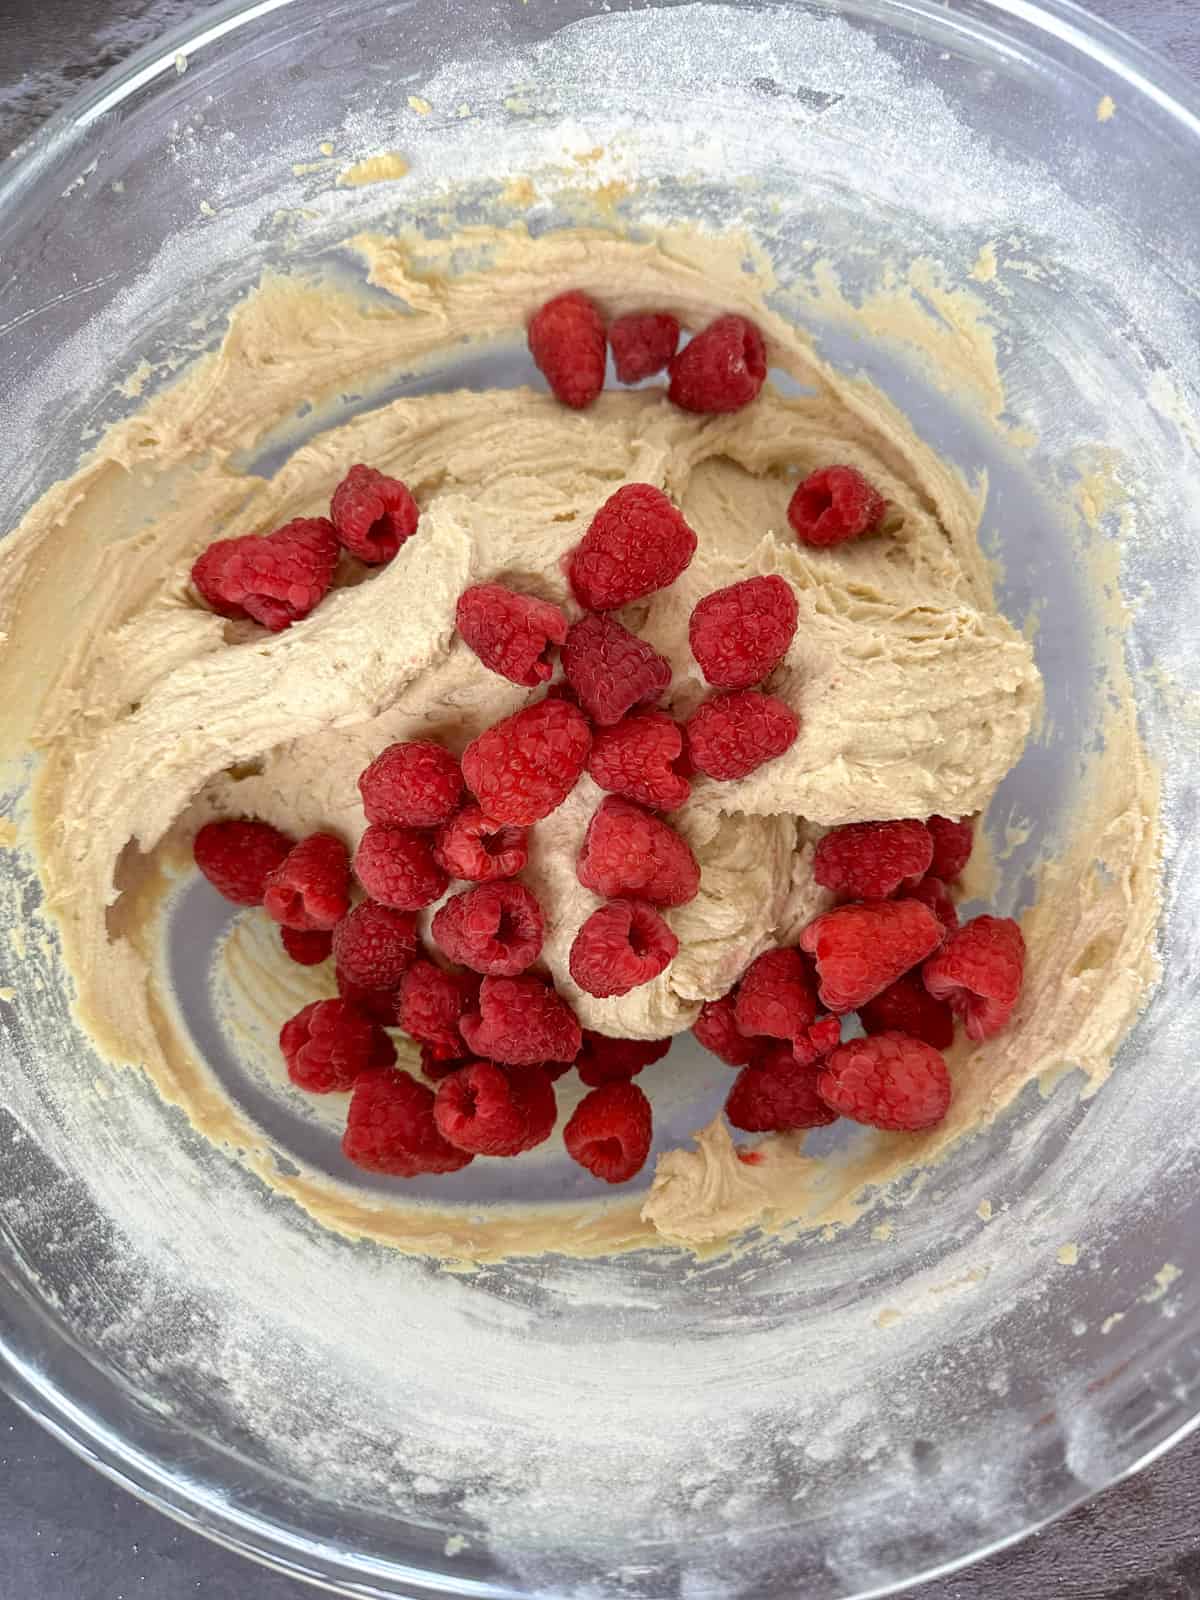 adding the raspberries to the batter